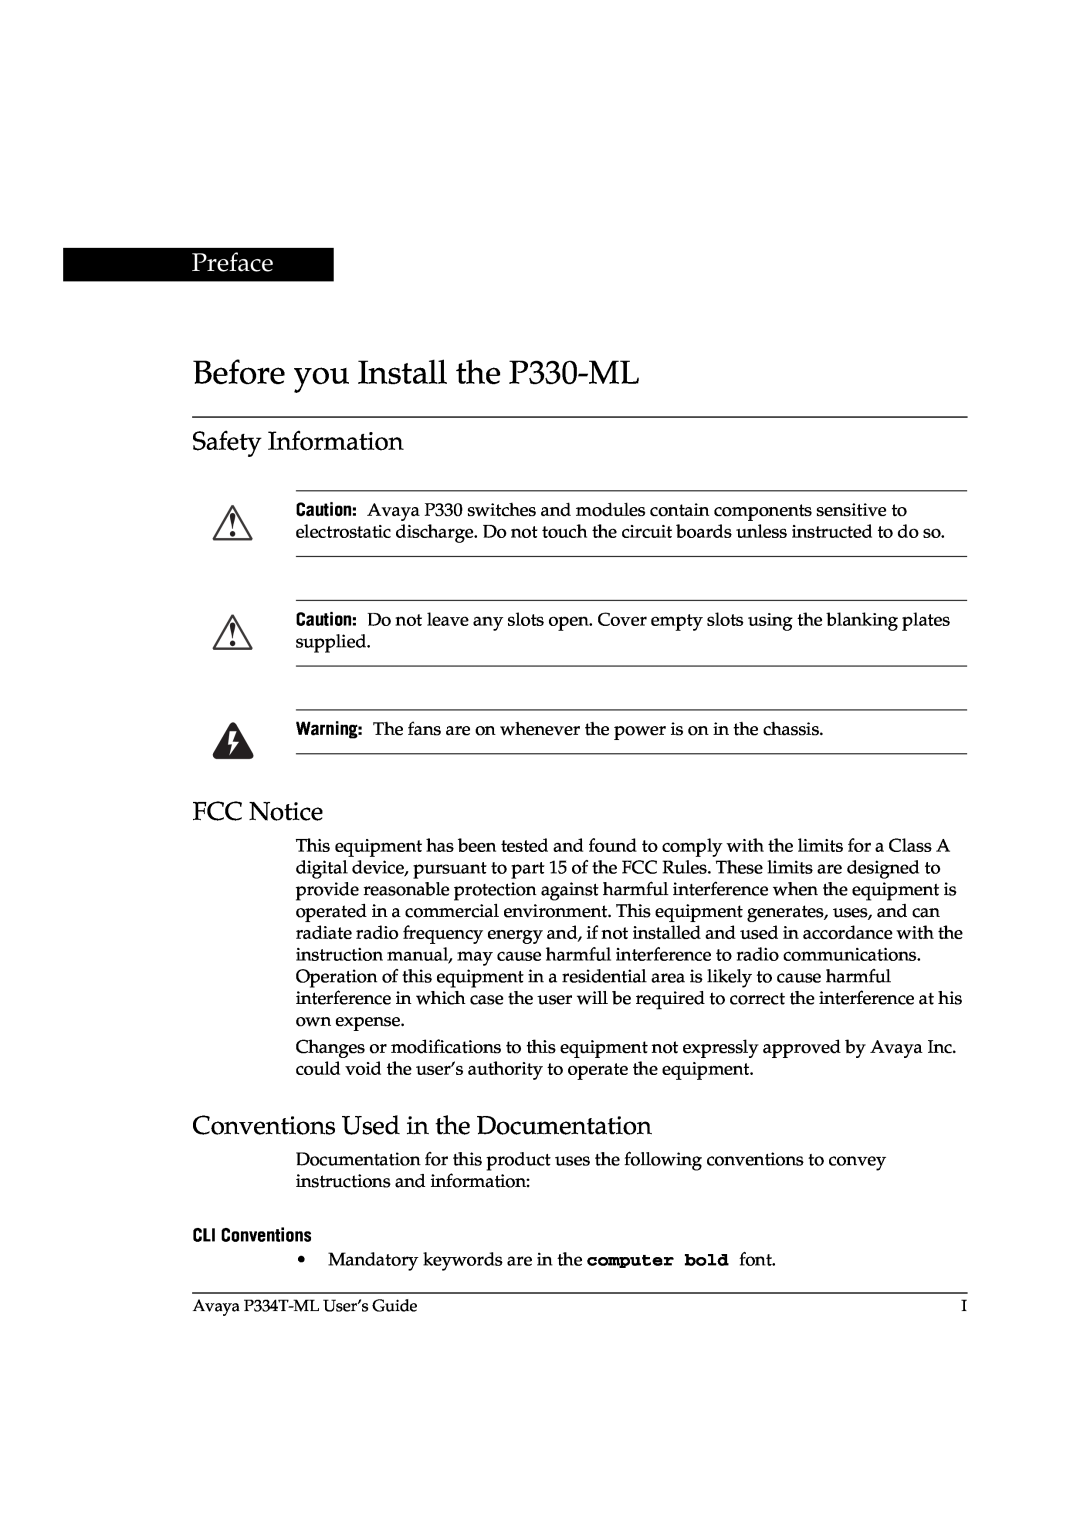 Avaya P3343T-ML manual Before you Install the P330-ML, Preface, Safety Information, FCC Notice, CLI Conventions 